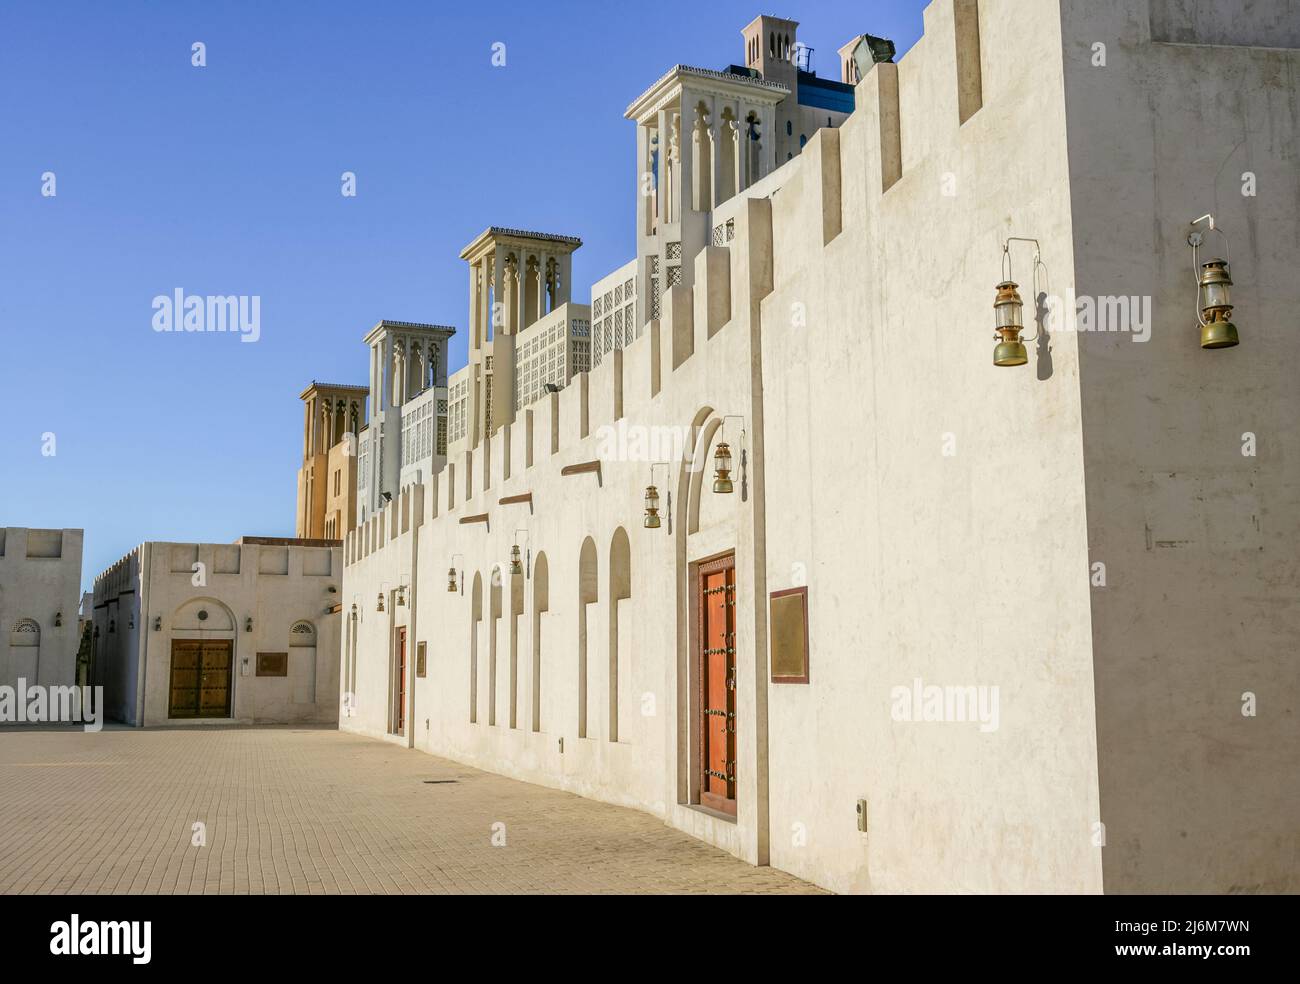 The restored Heritage Area in the city of Sharjah in the United Arab Emirates. Stock Photo